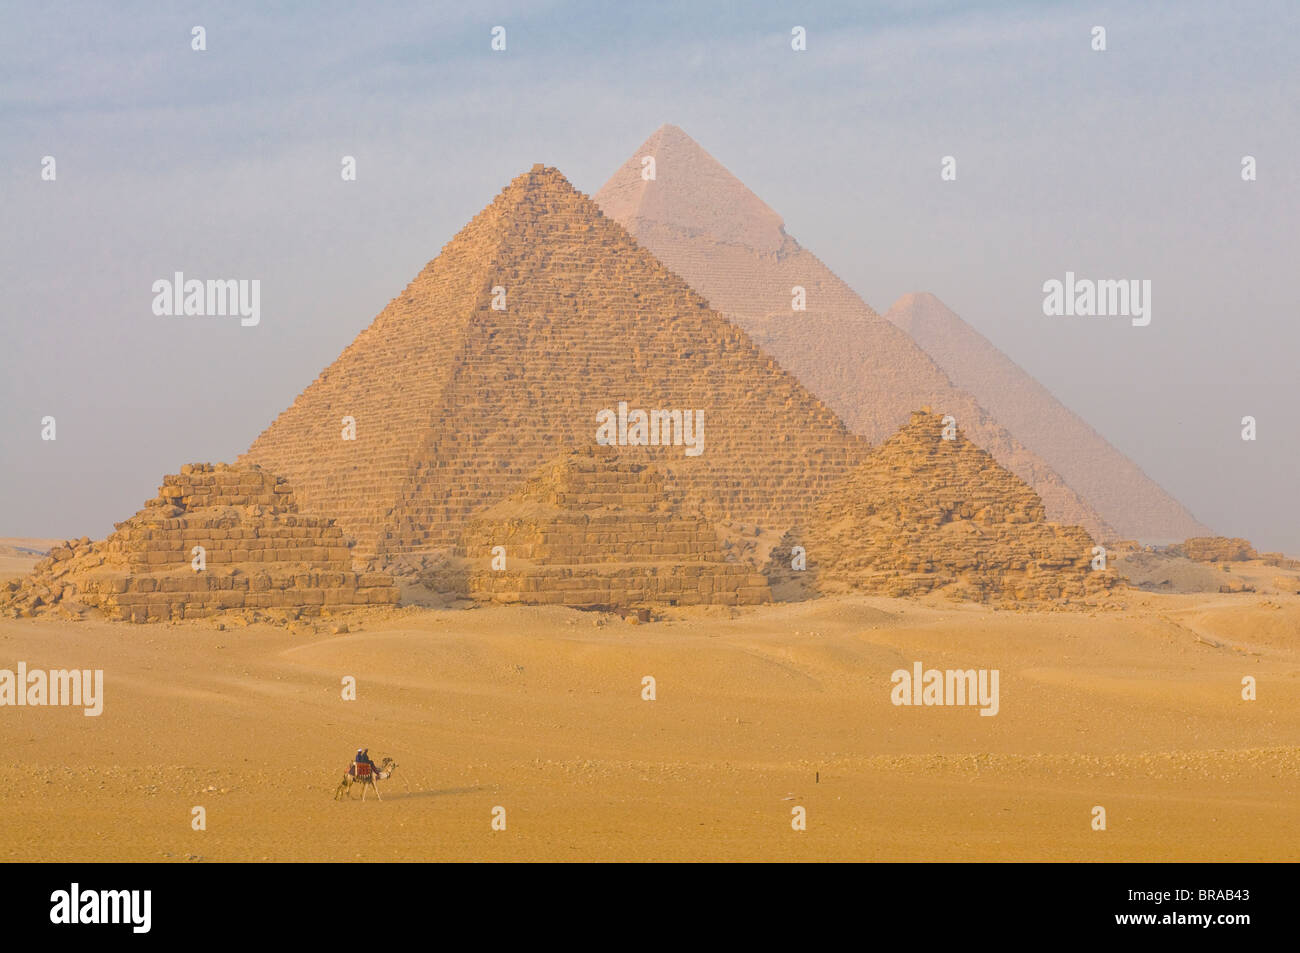 The Pyramids of Gizeh, UNESCO World Heritage Site, Cairo, Egypt, North Africa, Africa Stock Photo